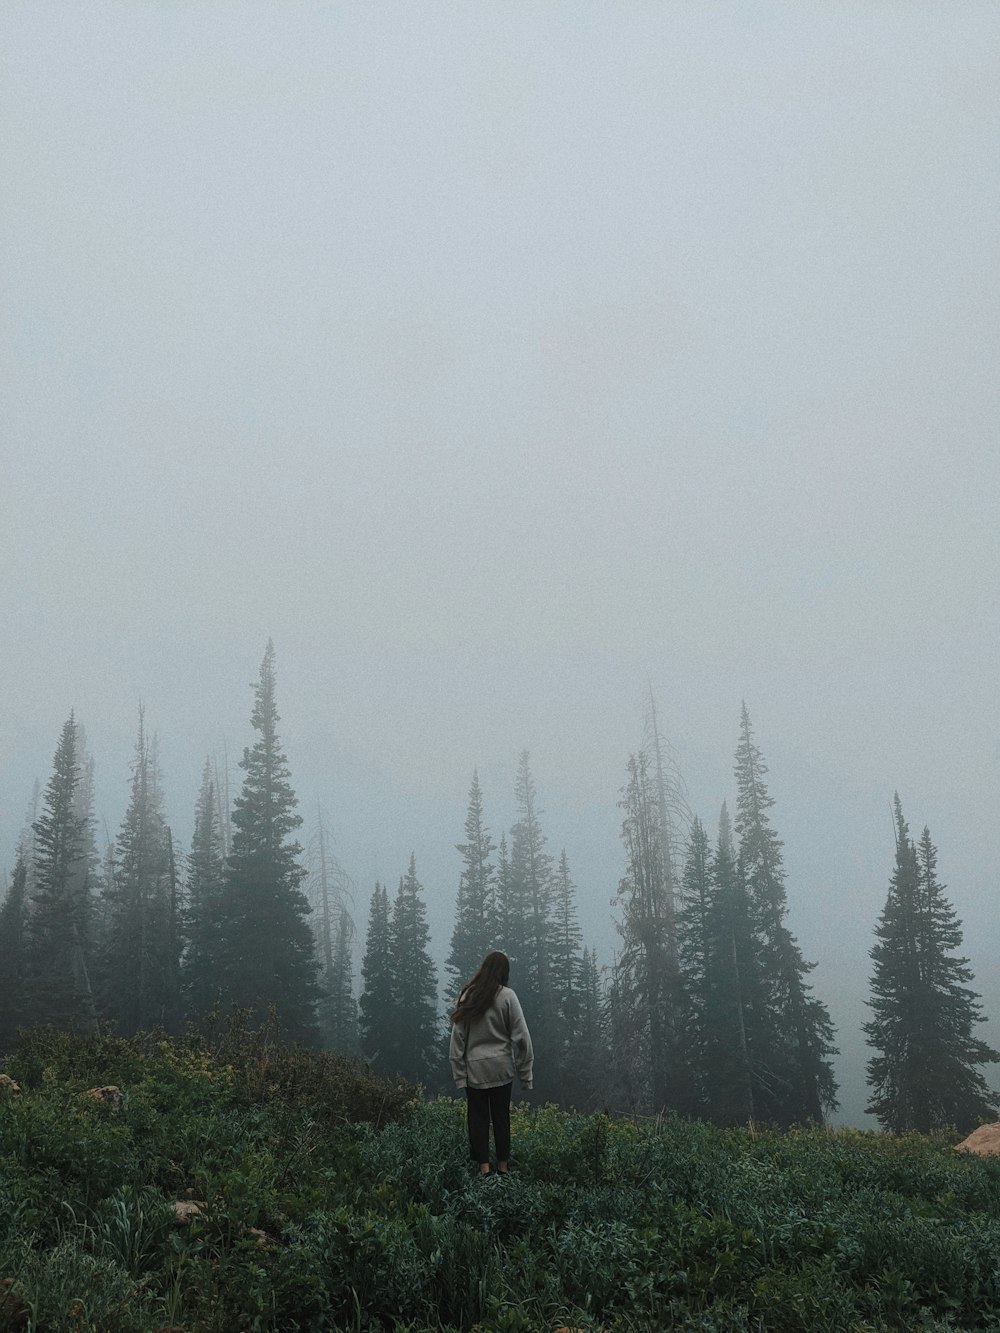 person in black jacket standing on green grass field near green pine trees during foggy weather